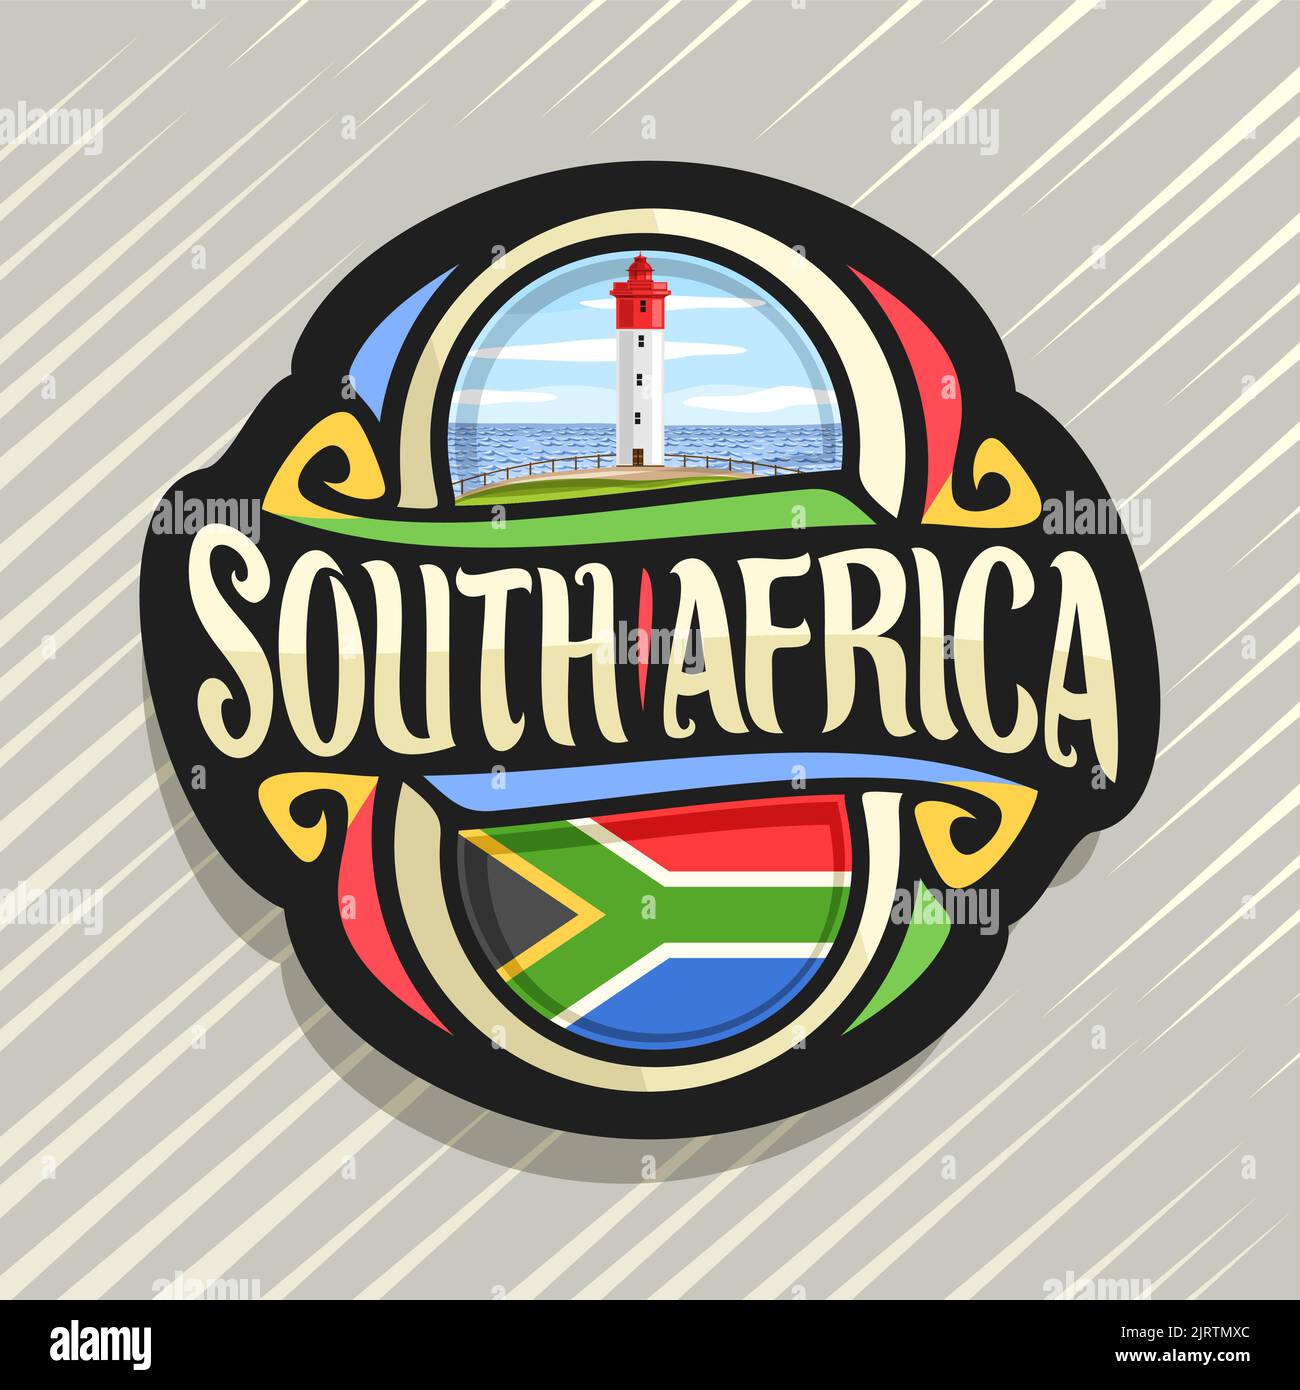 Vector logo for South Africa country, fridge magnet with south african state flag, original brush typeface for words south africa and national symbol Stock Vector